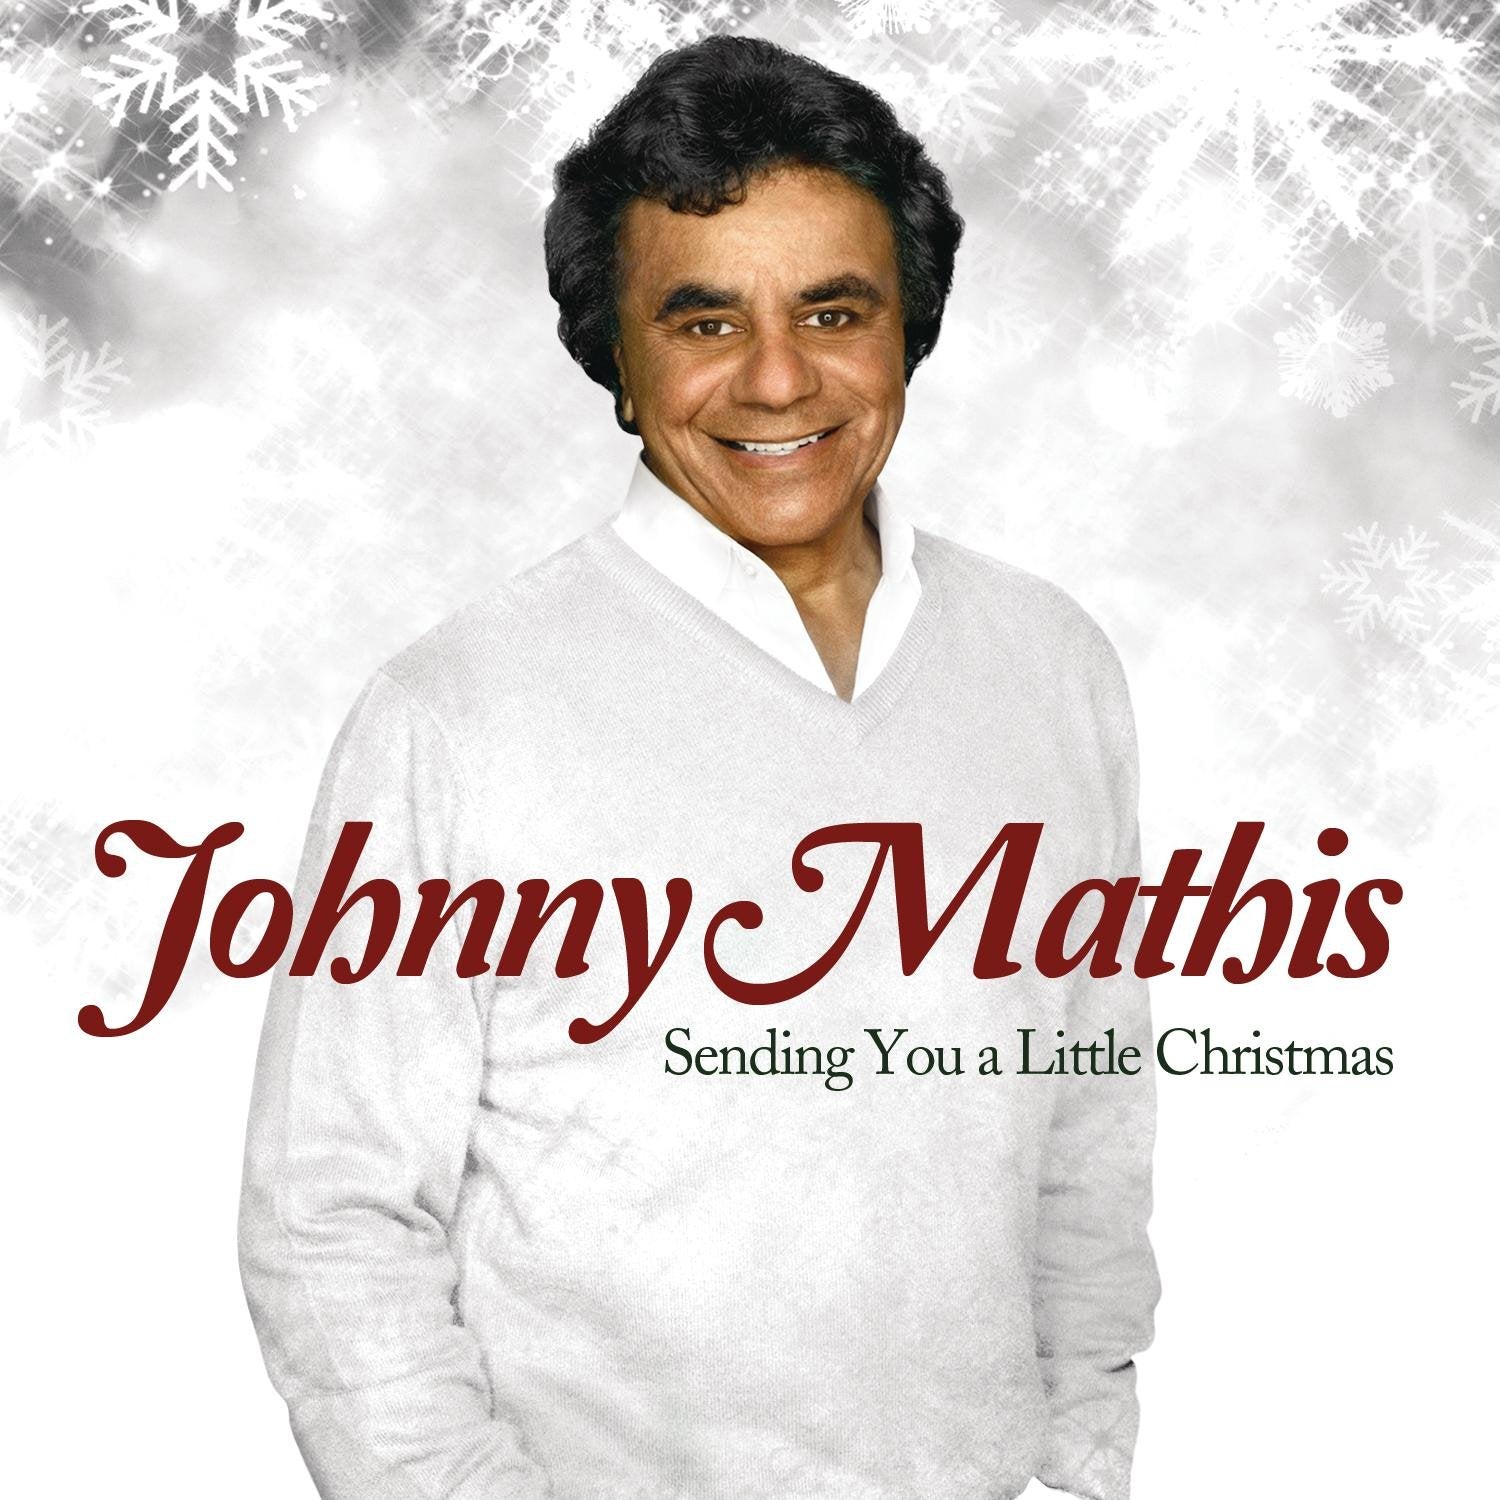 Joihnny Mathis- Sending You a Little Christmas - Darkside Records